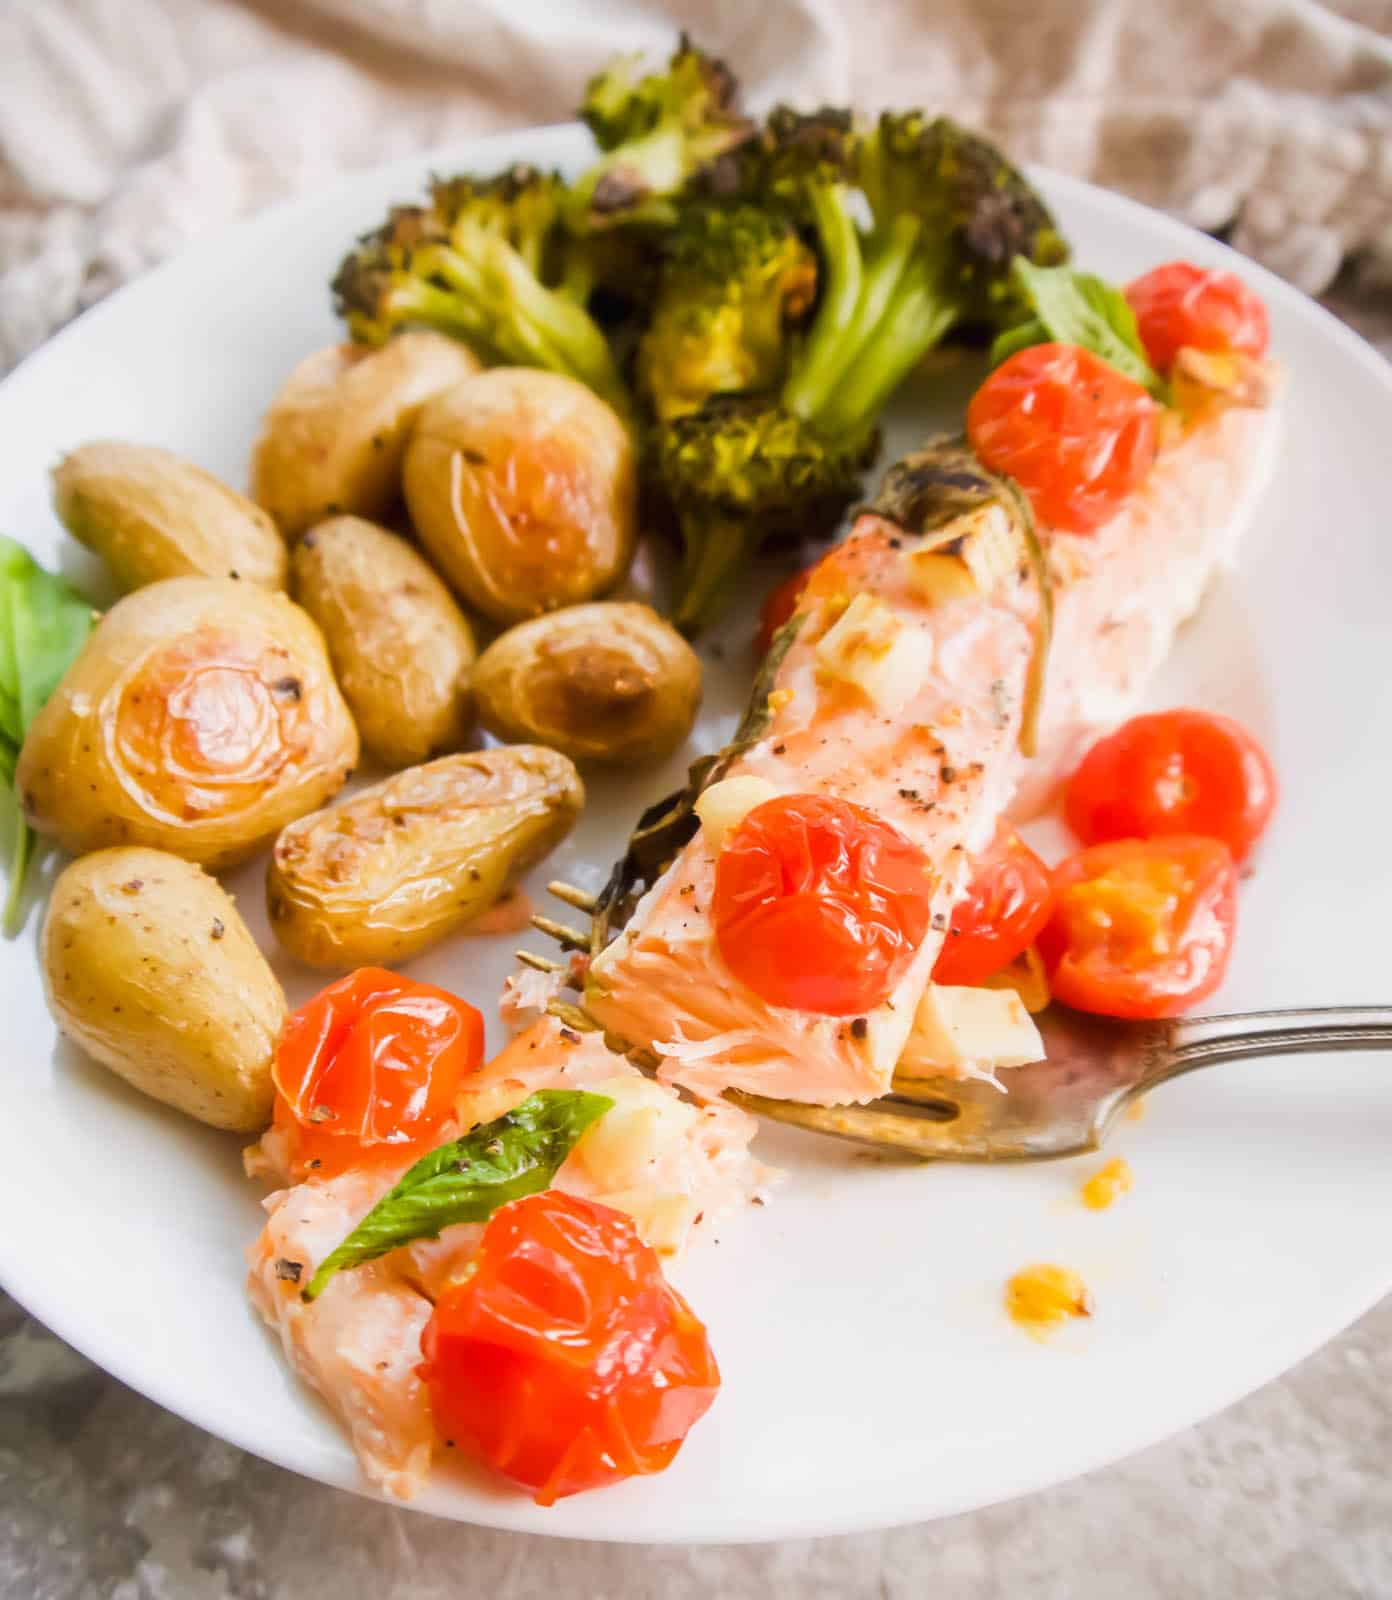 Baked salmon with tomatoes on a plate with potatoes and broccoli.